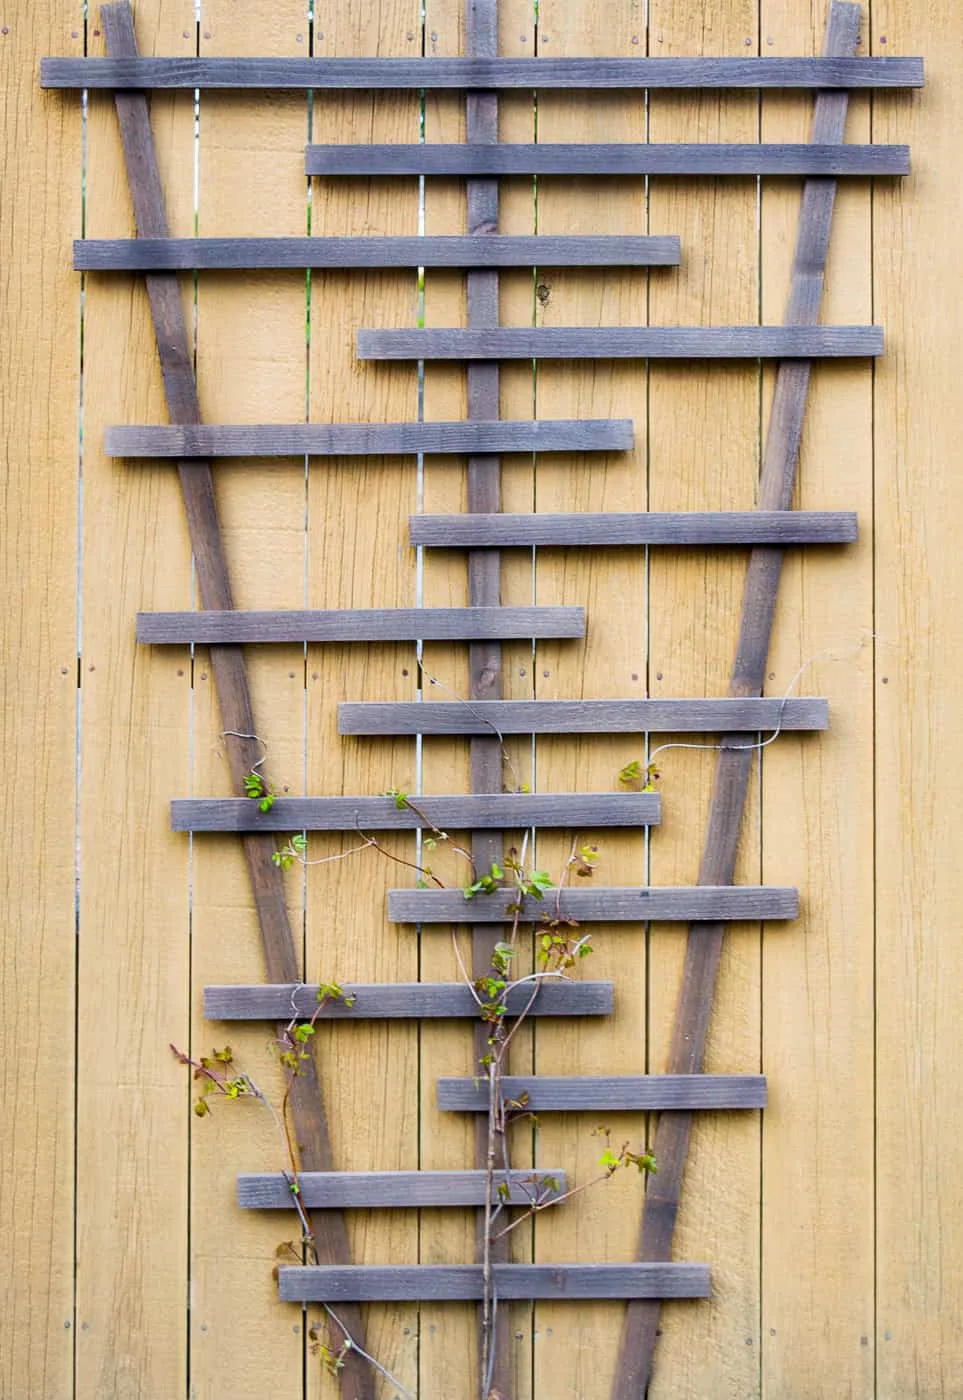 DIY trellis attached to fence